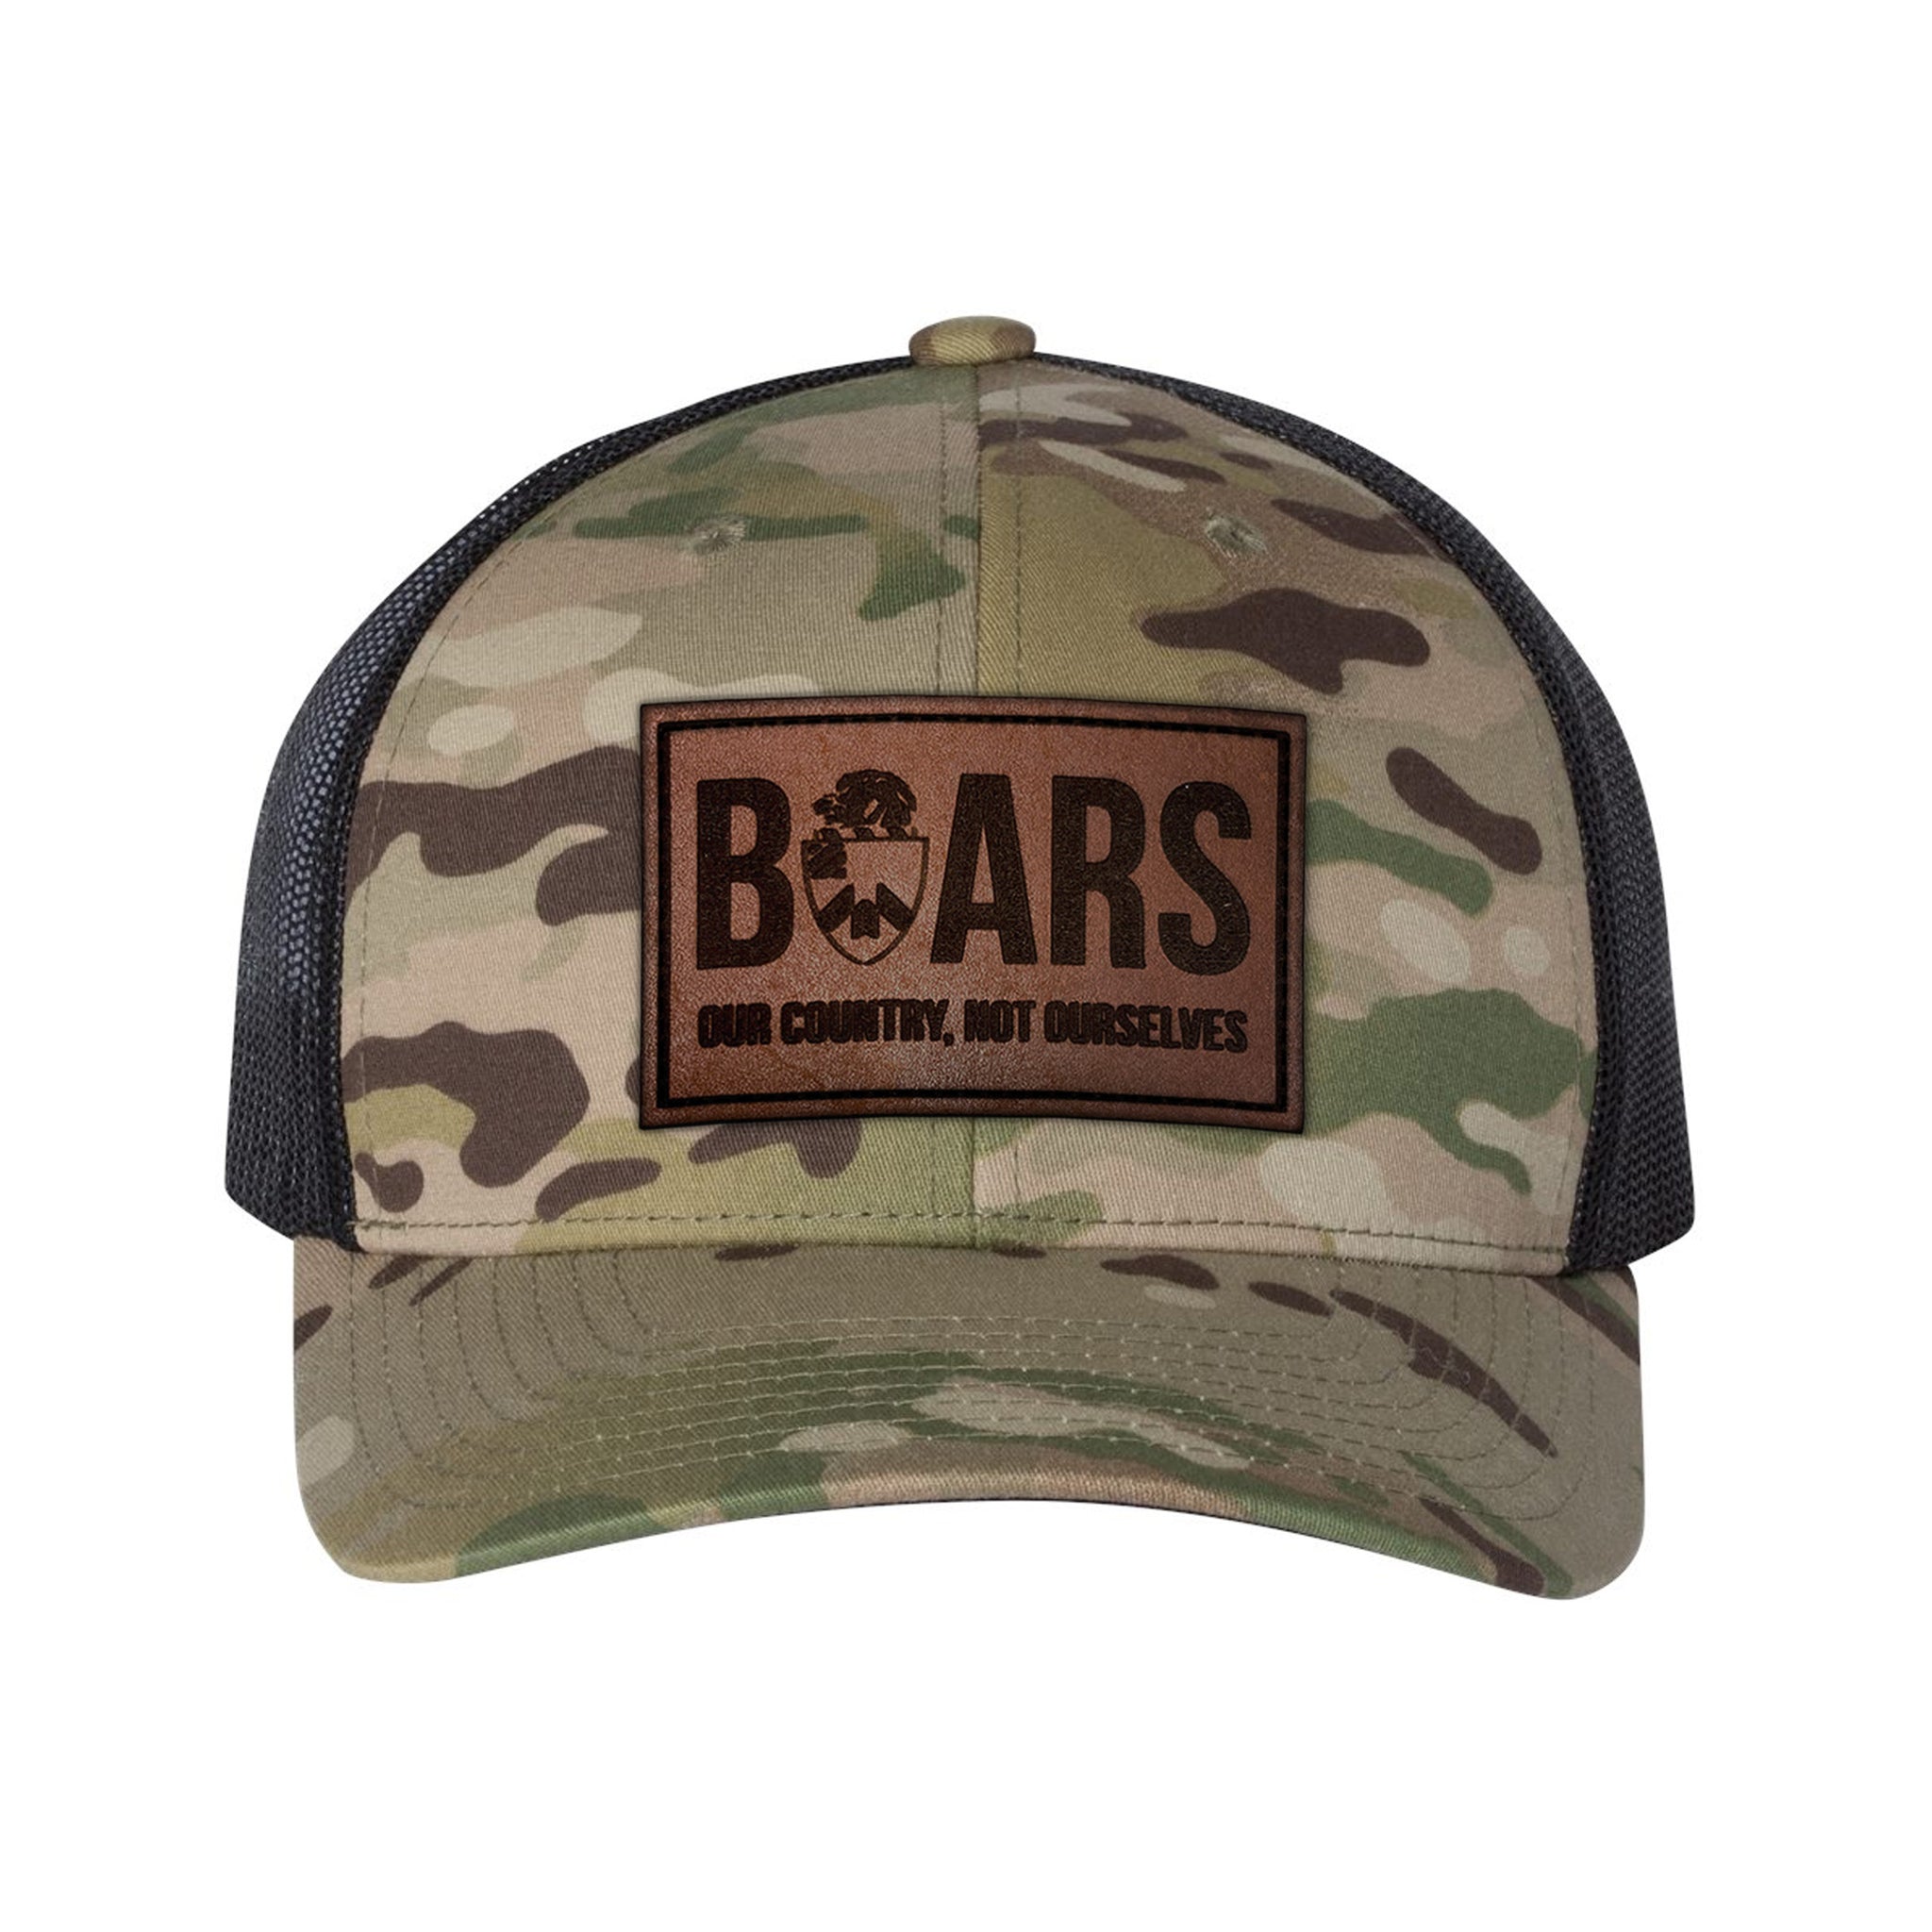 Wild Boars Leather Snap-Back